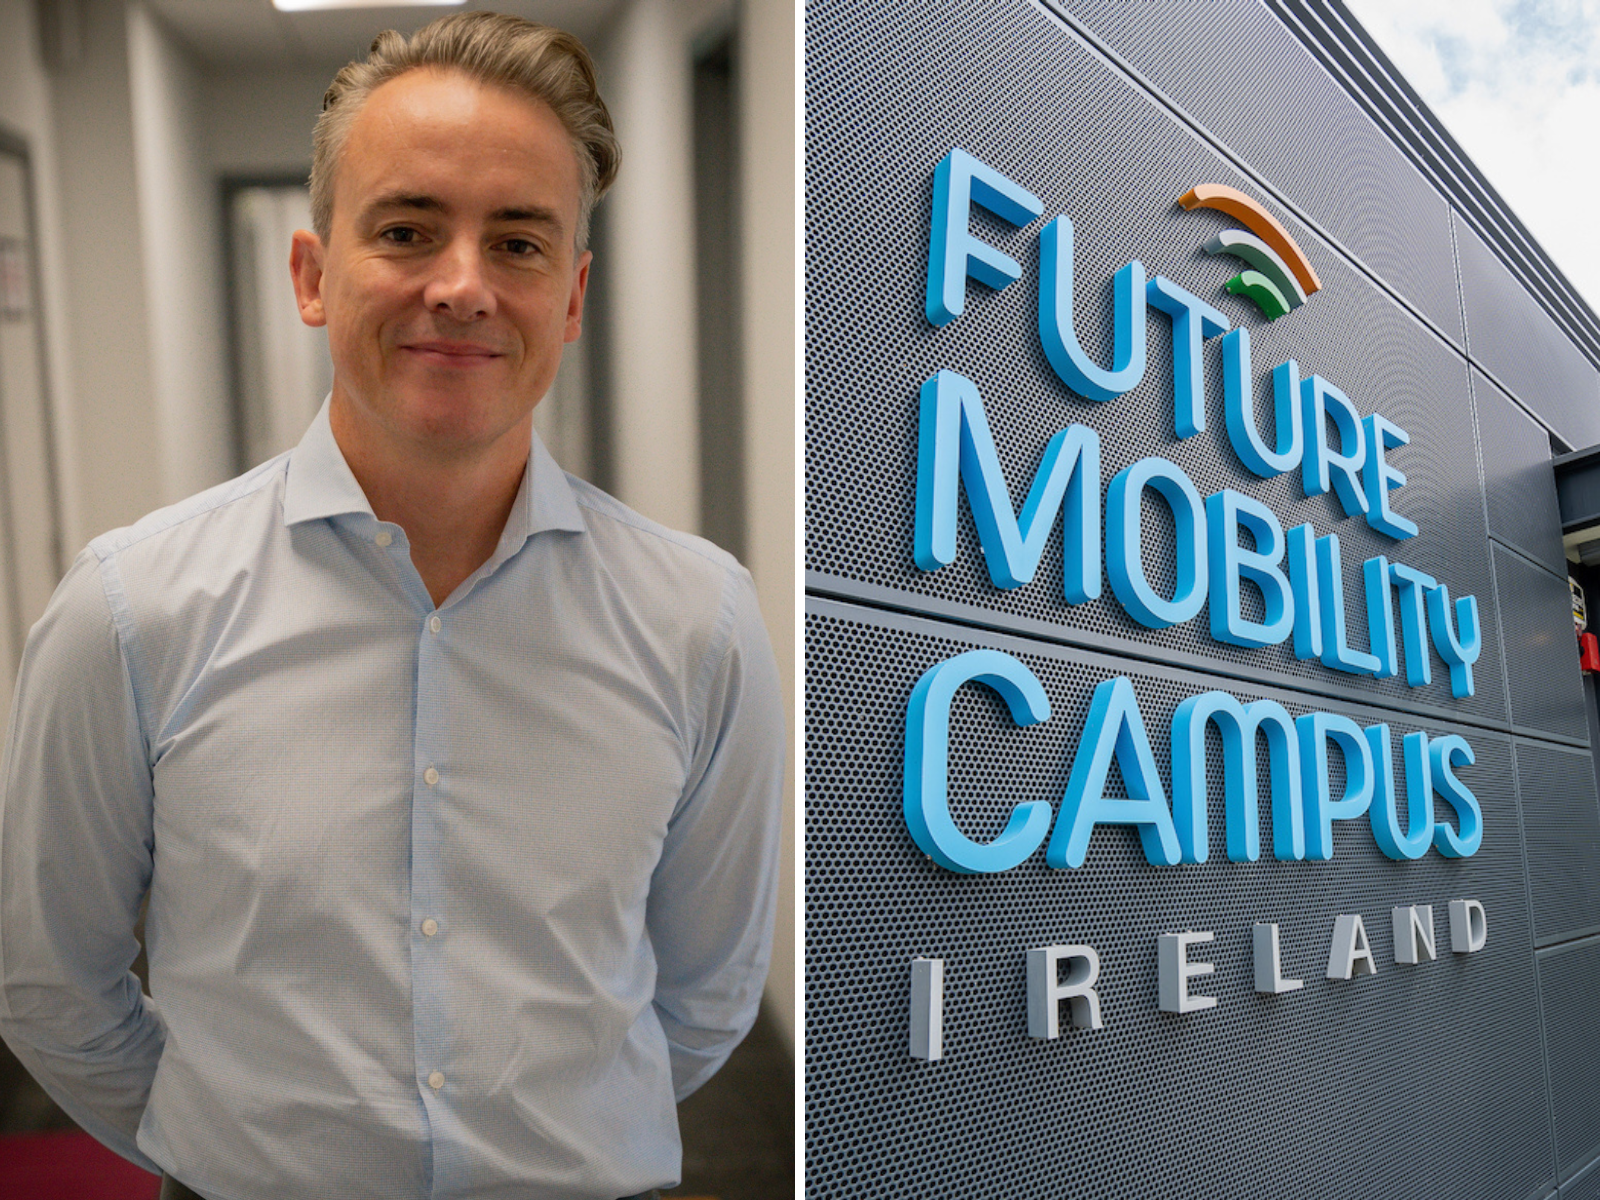 Future Mobility Campus Ireland CEO Russell Vickers 